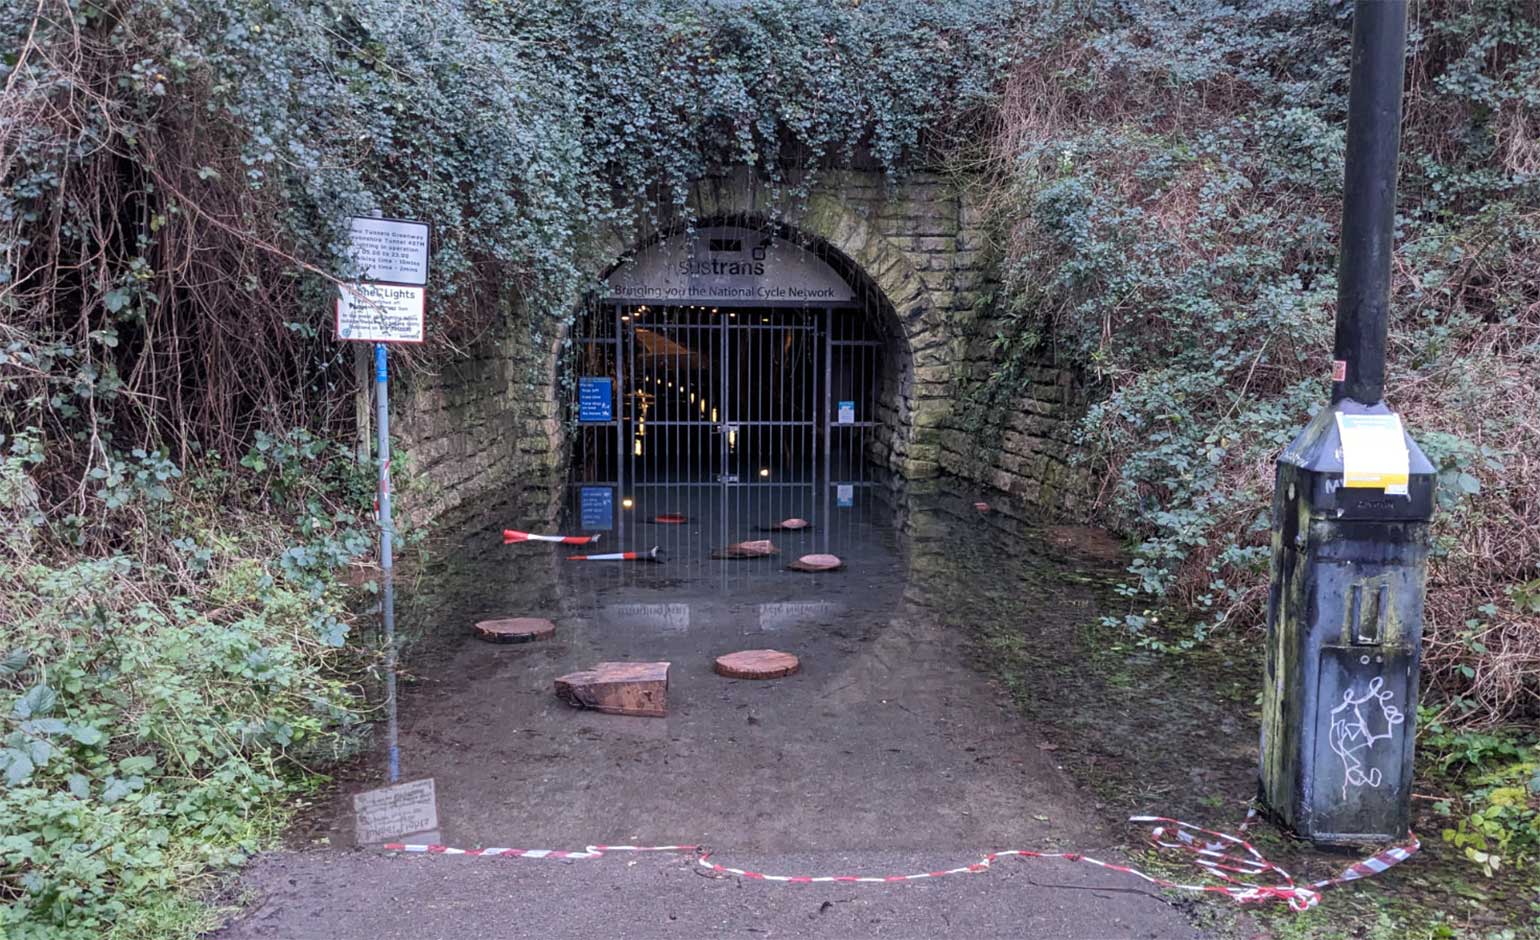 Devonshire Tunnel reopens then closes again after heavy rainfall